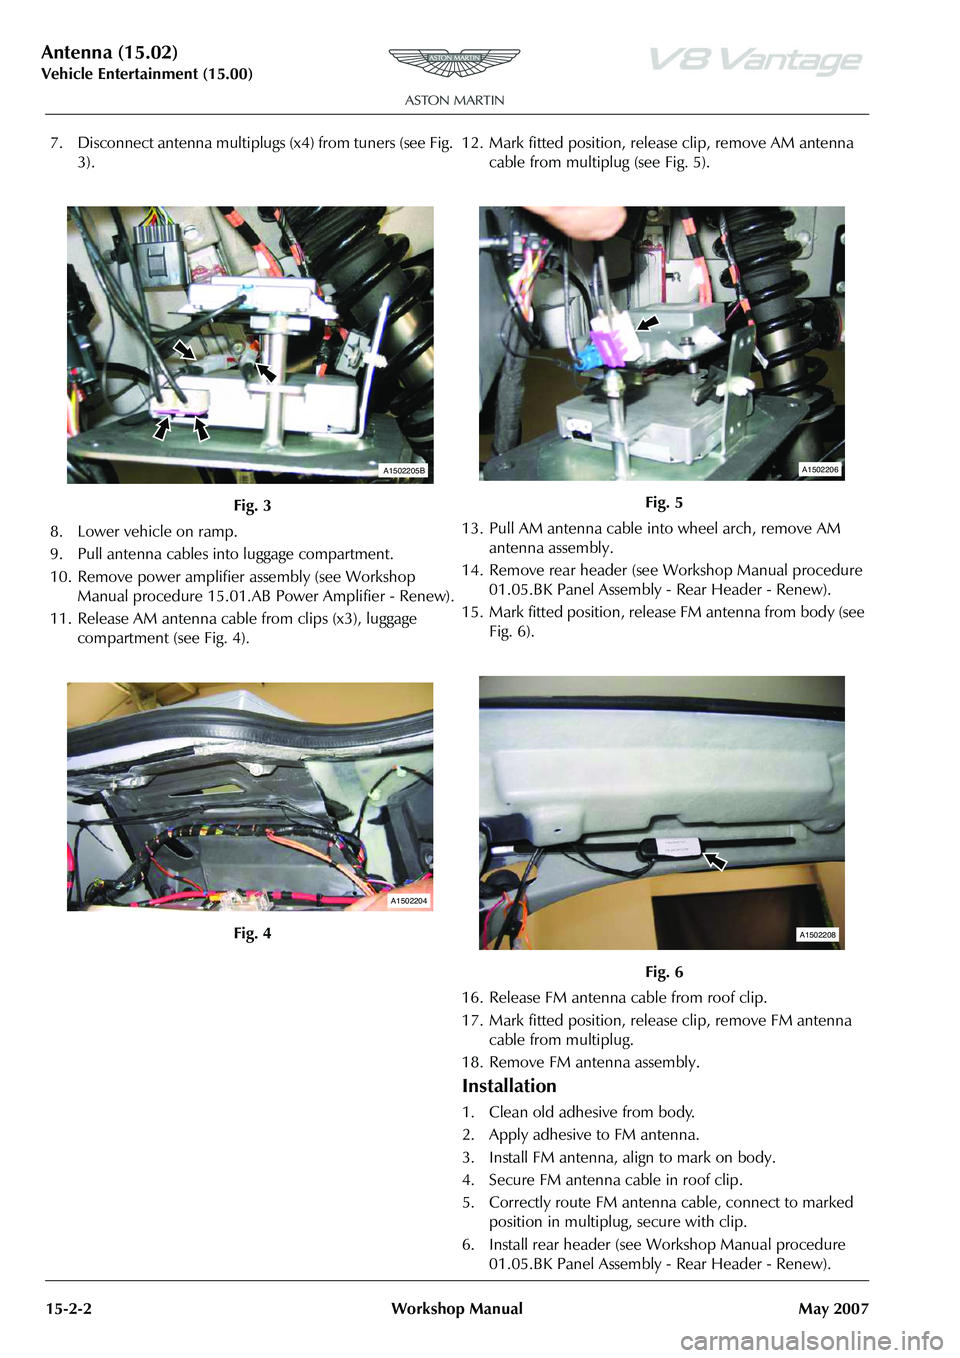 ASTON MARTIN V8 VANTAGE 2010  Workshop Manual Antenna (15.02)
Vehicle Entertainment (15.00)15-2-2 Workshop Manual May 2007
7. Disconnect antenna multiplugs  (x4) from tuners (see Fig. 
3).
8. Lower vehicle on ramp.
9. Pull antenna cables into lug